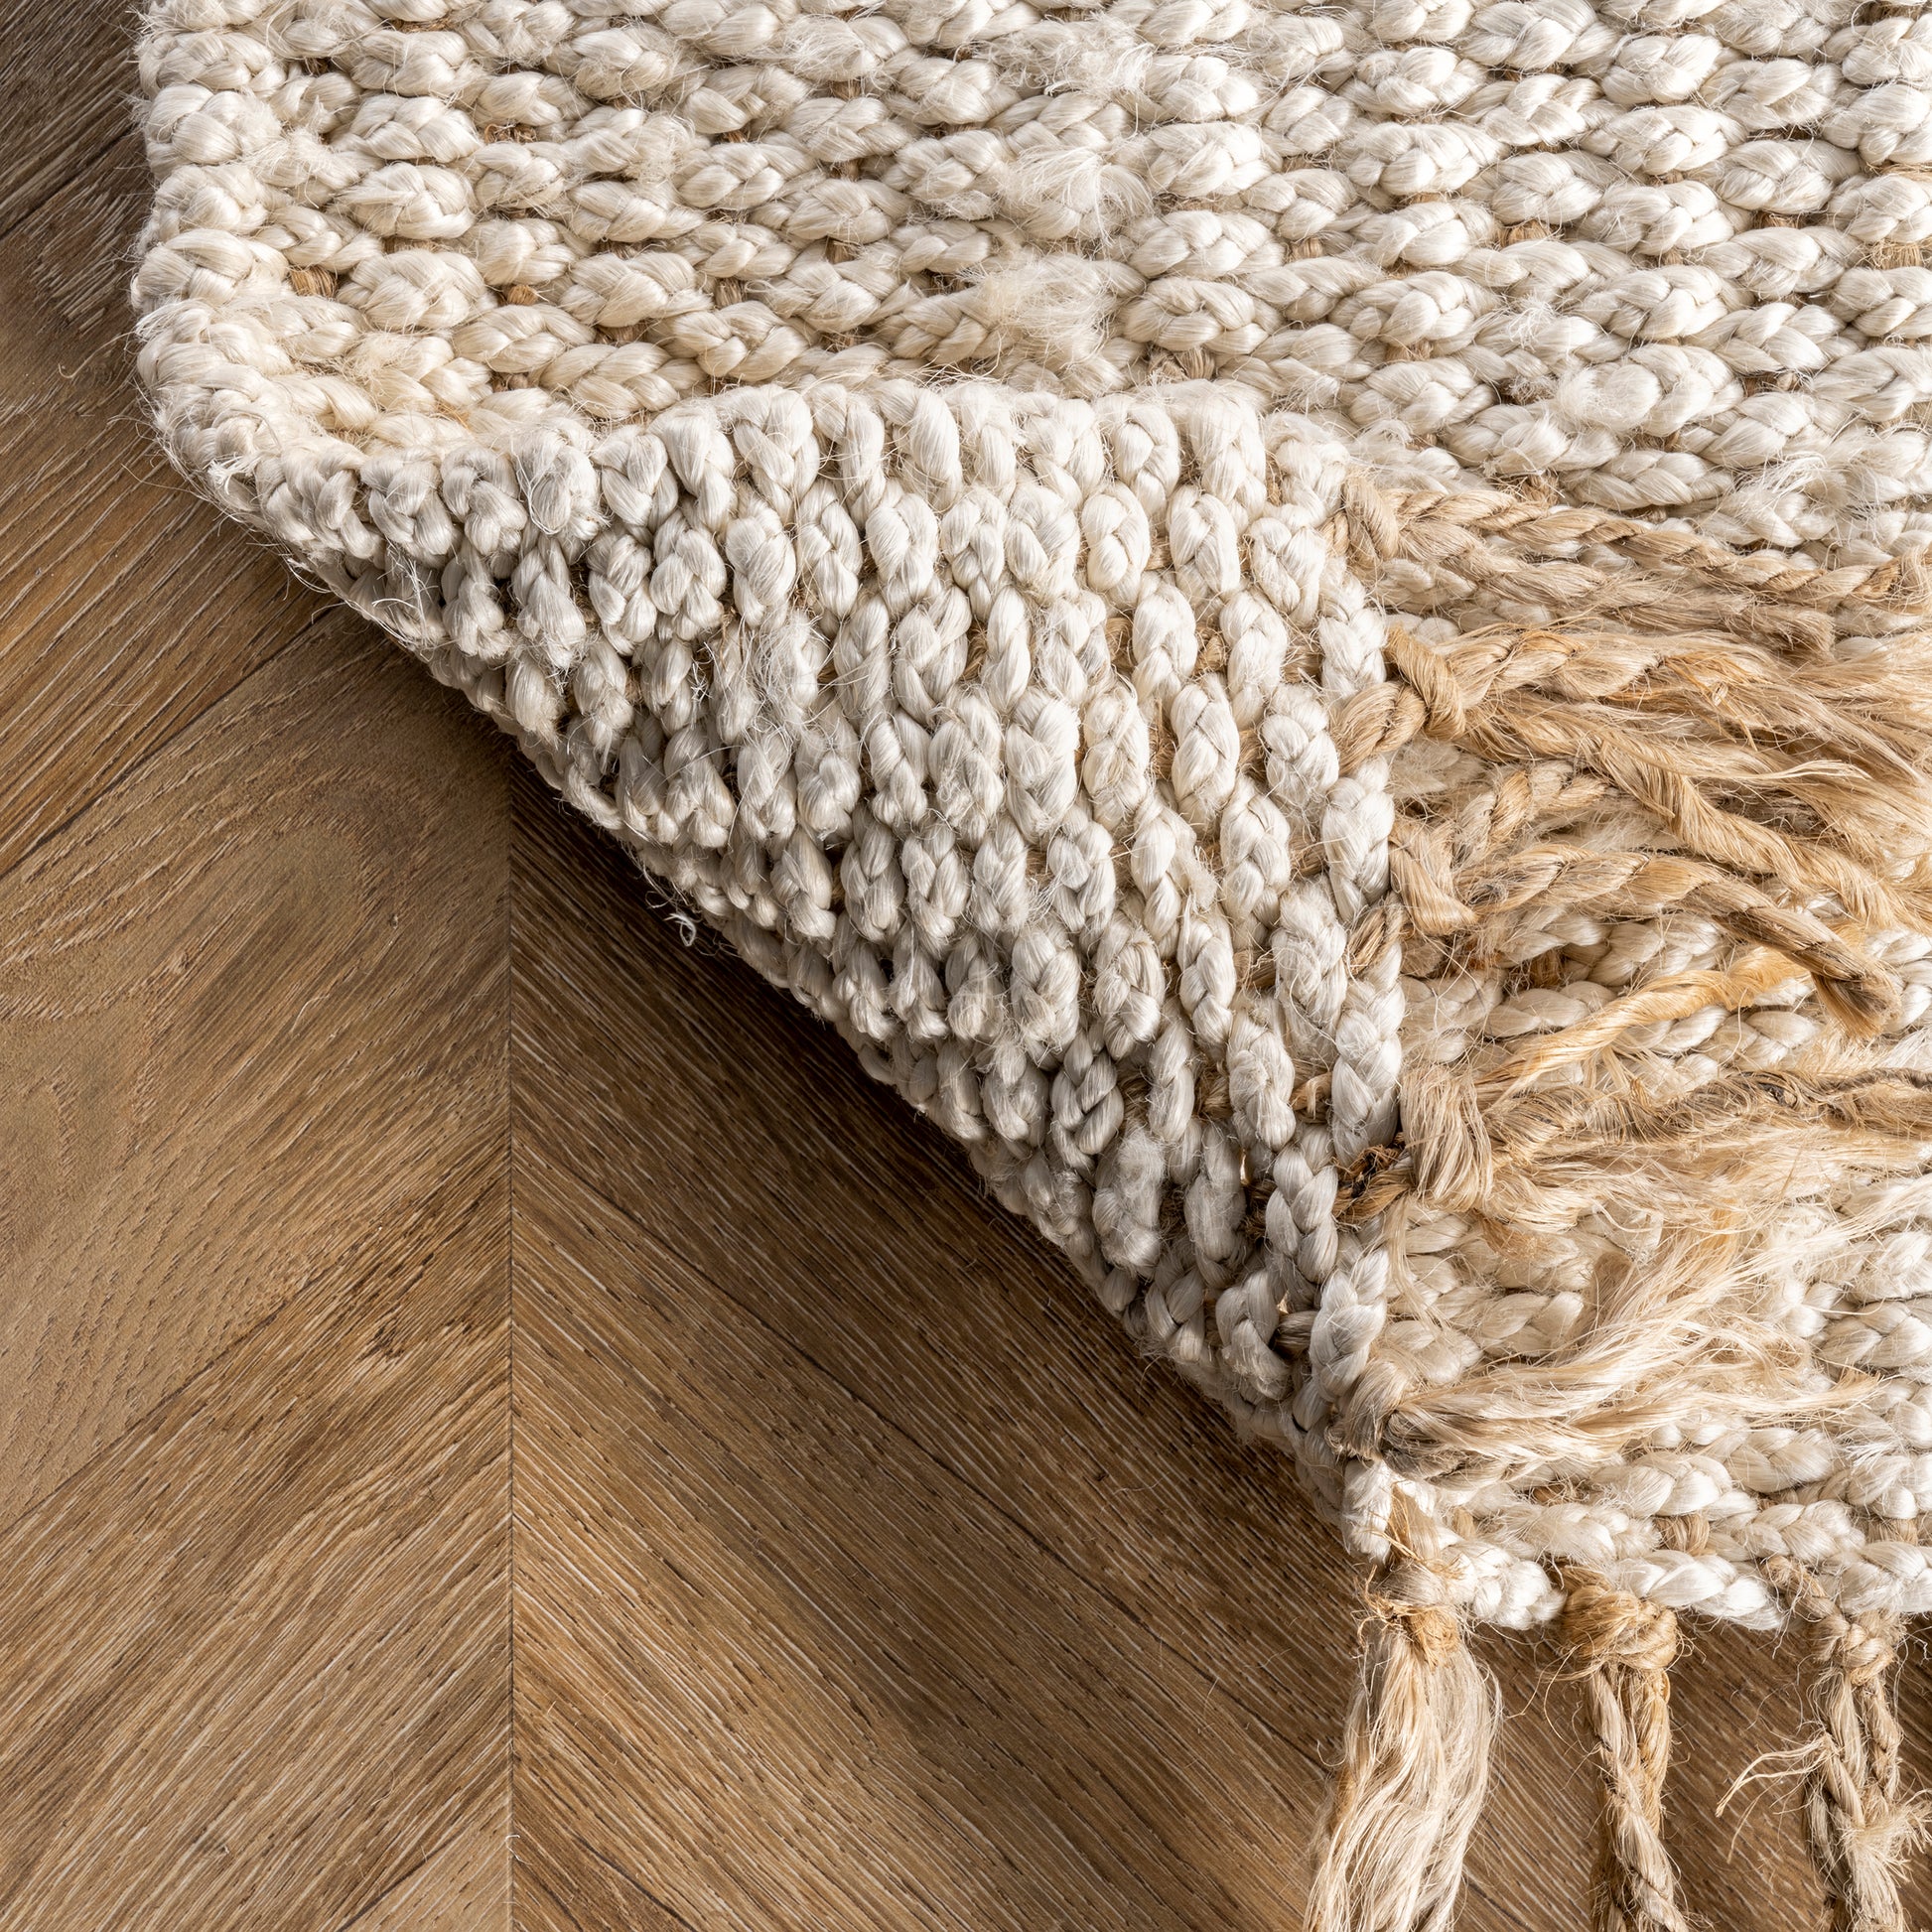 Nuloom Benavides Clal01A Off White Area Rug